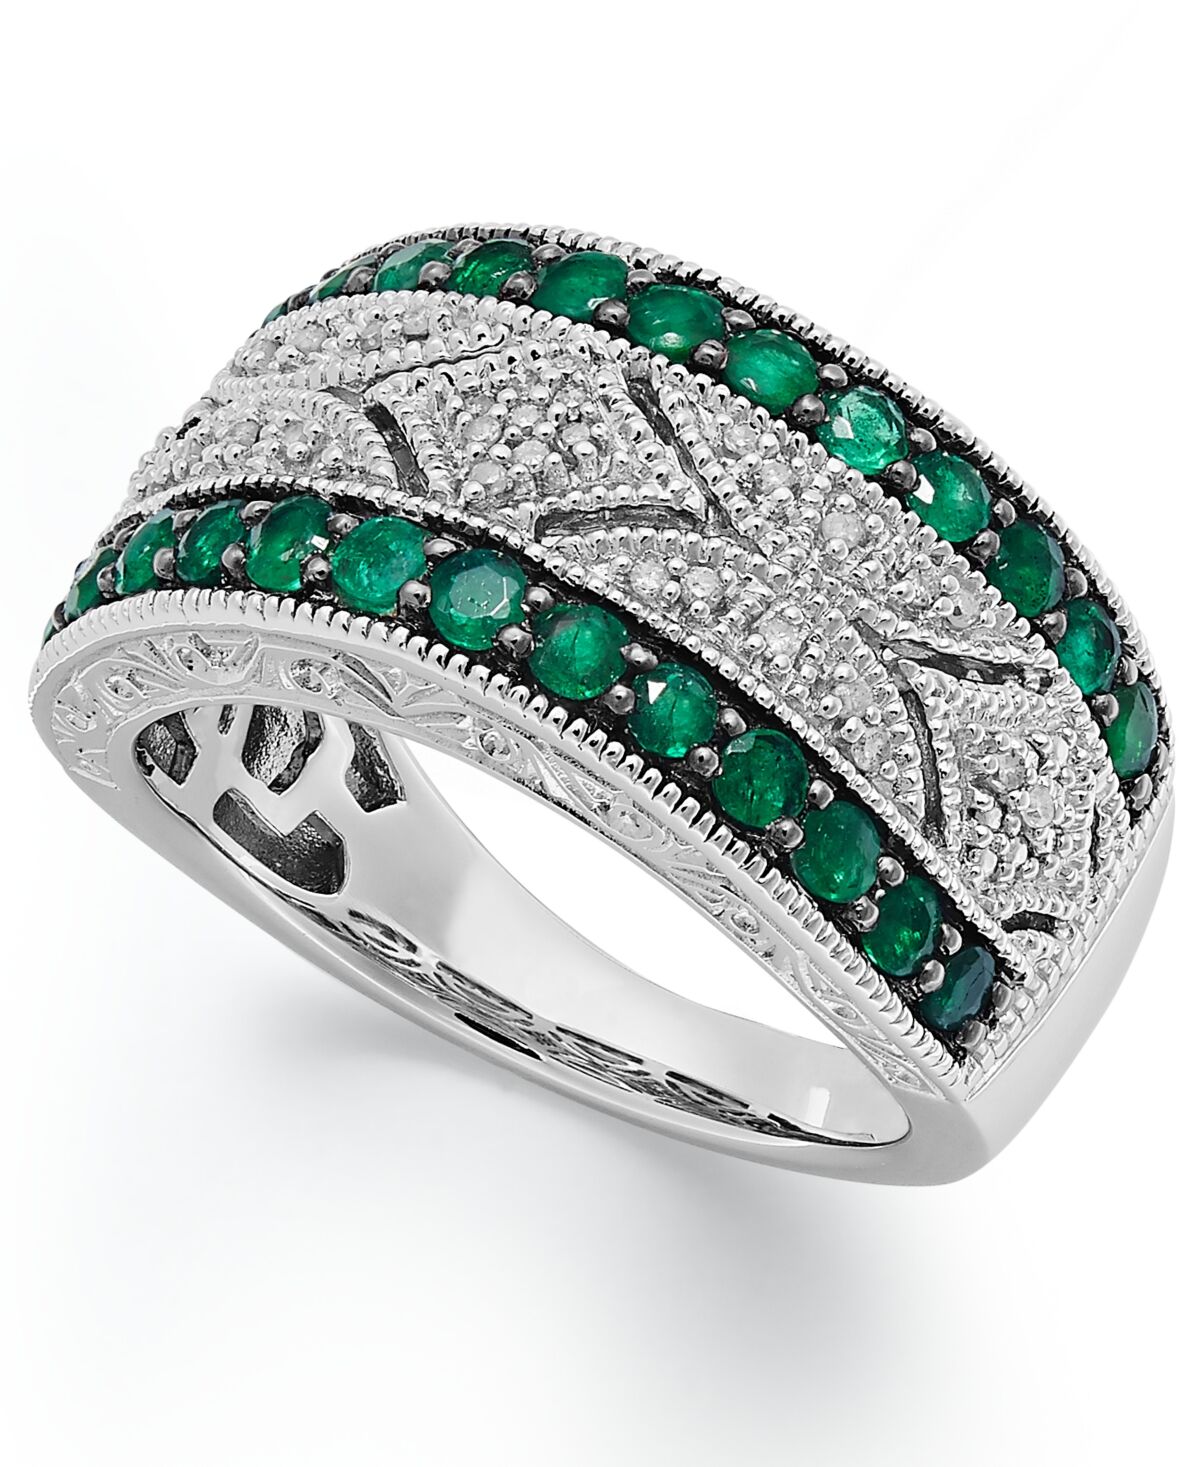 Macy's Sapphire (1 ct. t.w.) and Diamond (1/10 ct. t.w.) Ring in Sterling Silver (Also Available in Emerald and Ruby) - Emerald